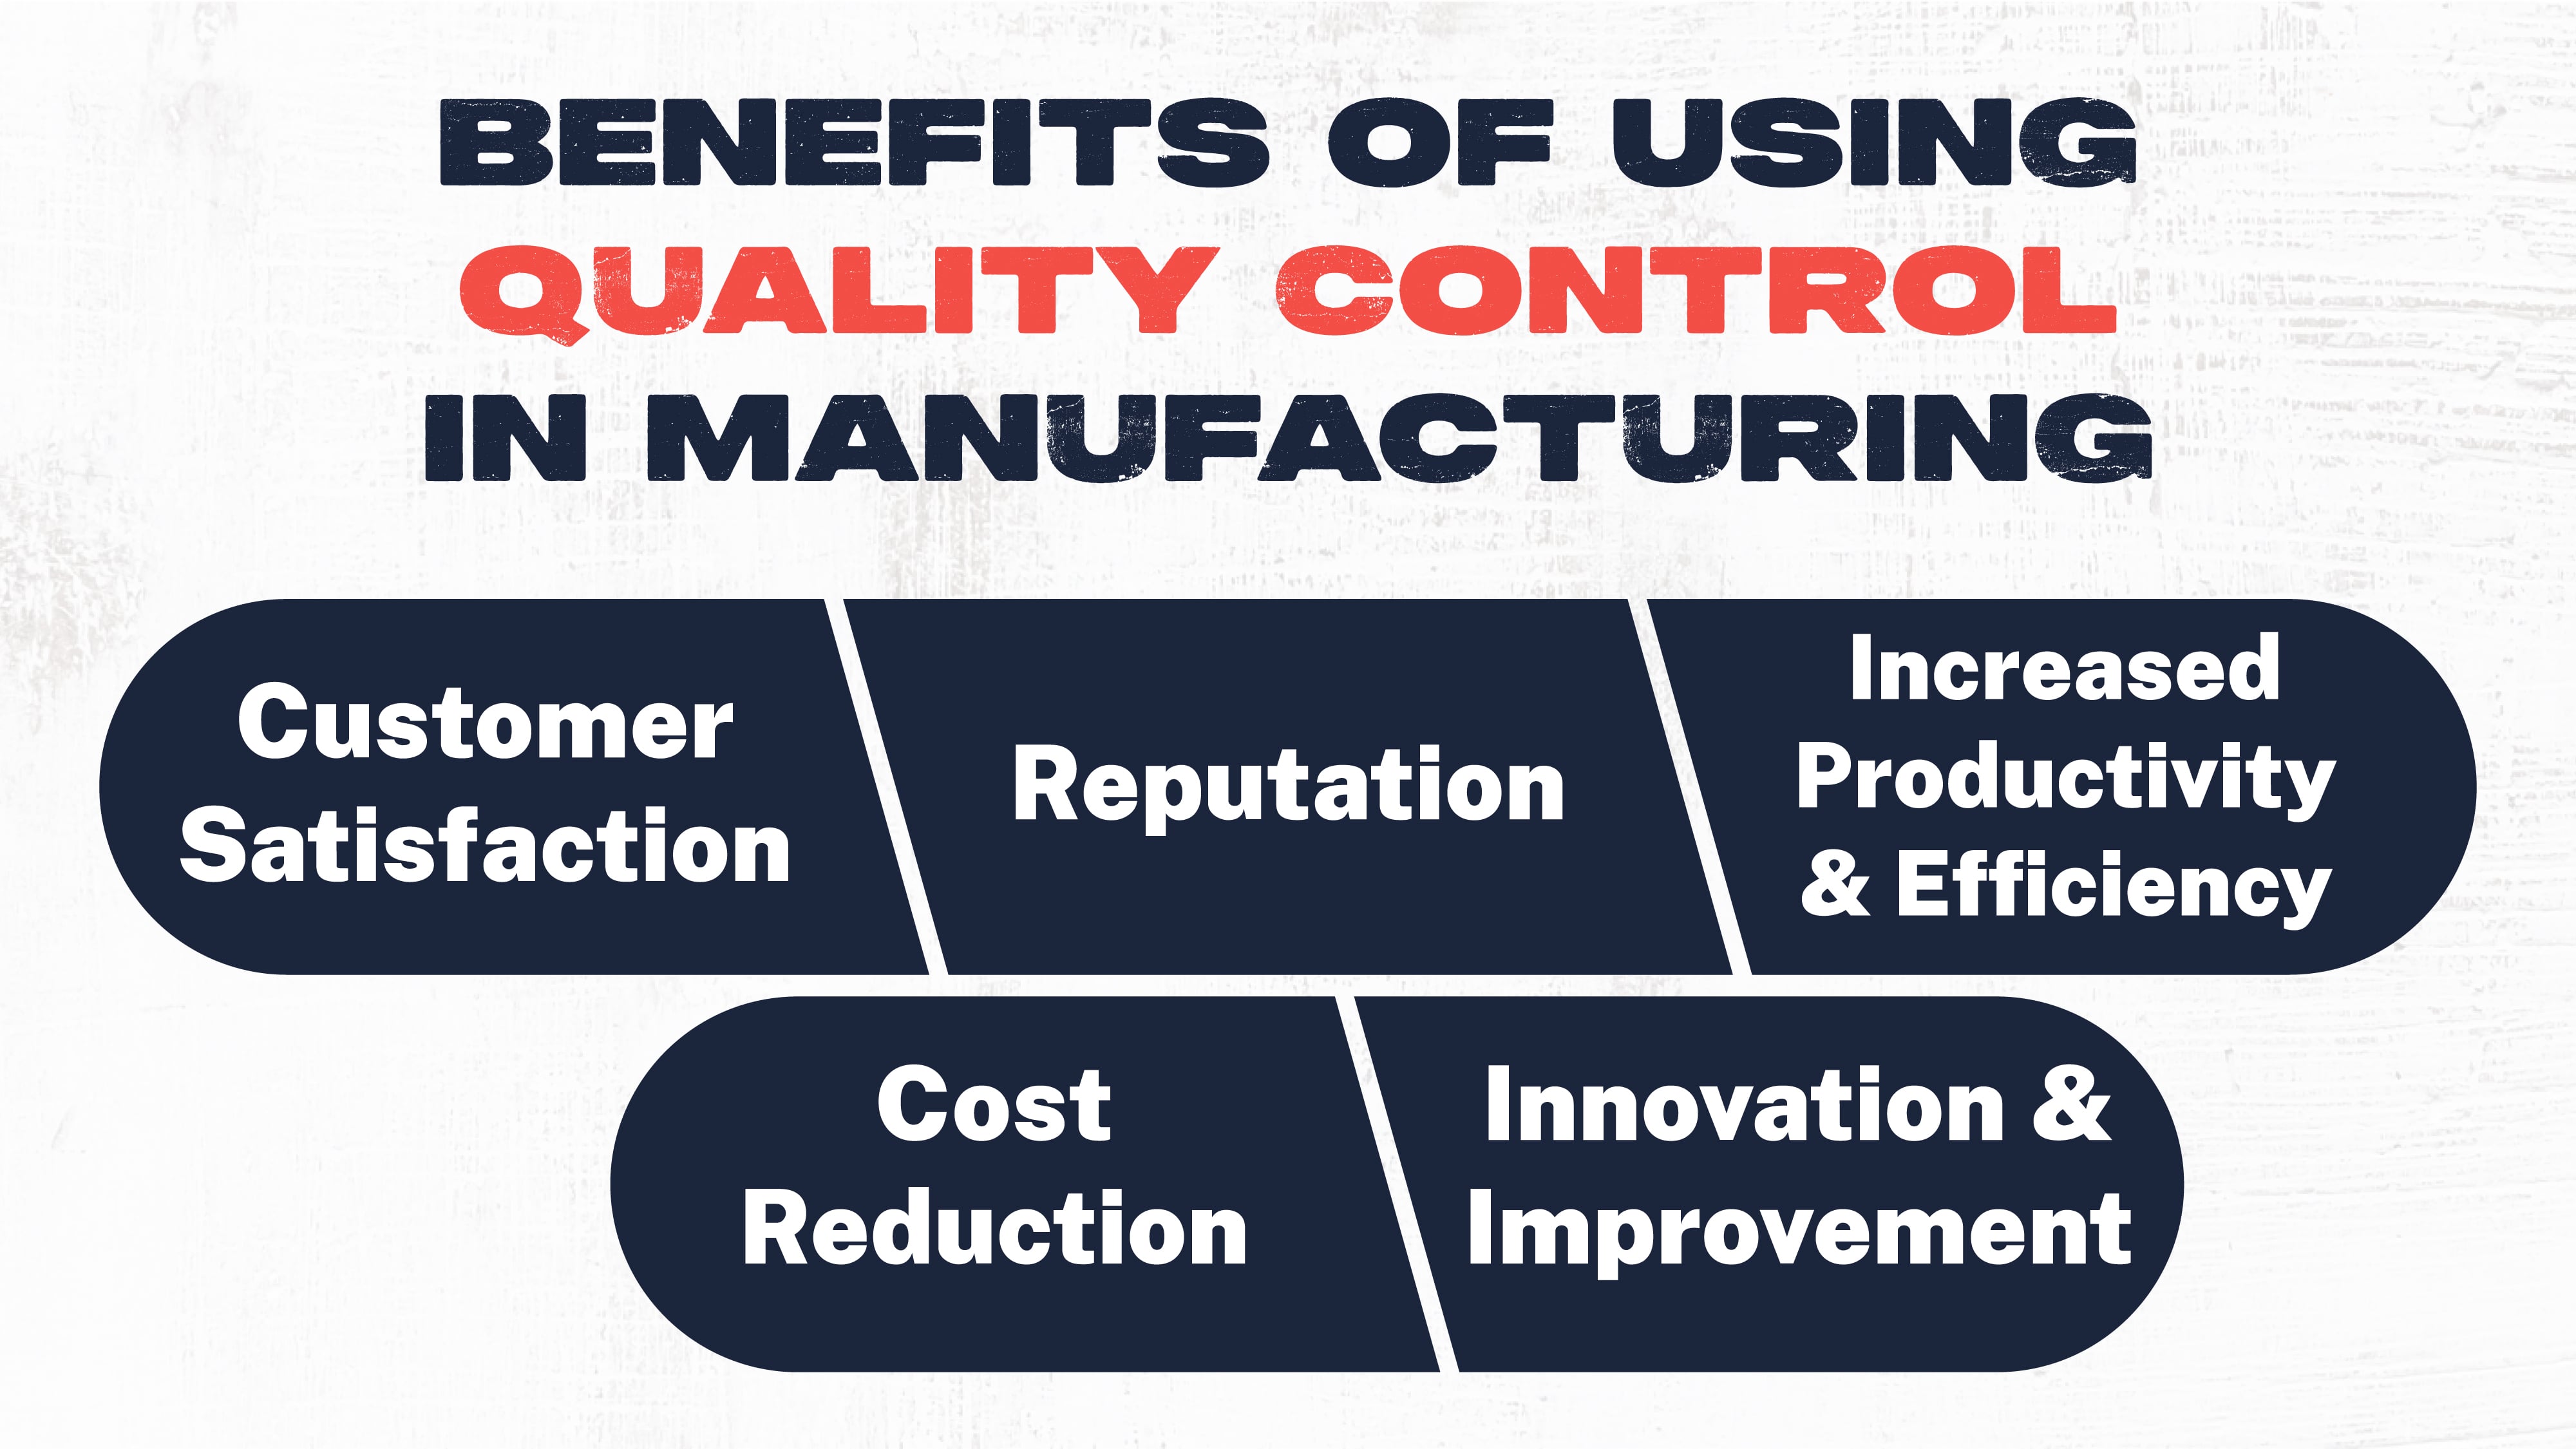 Benefits of Using Quality Control in Manufacturing